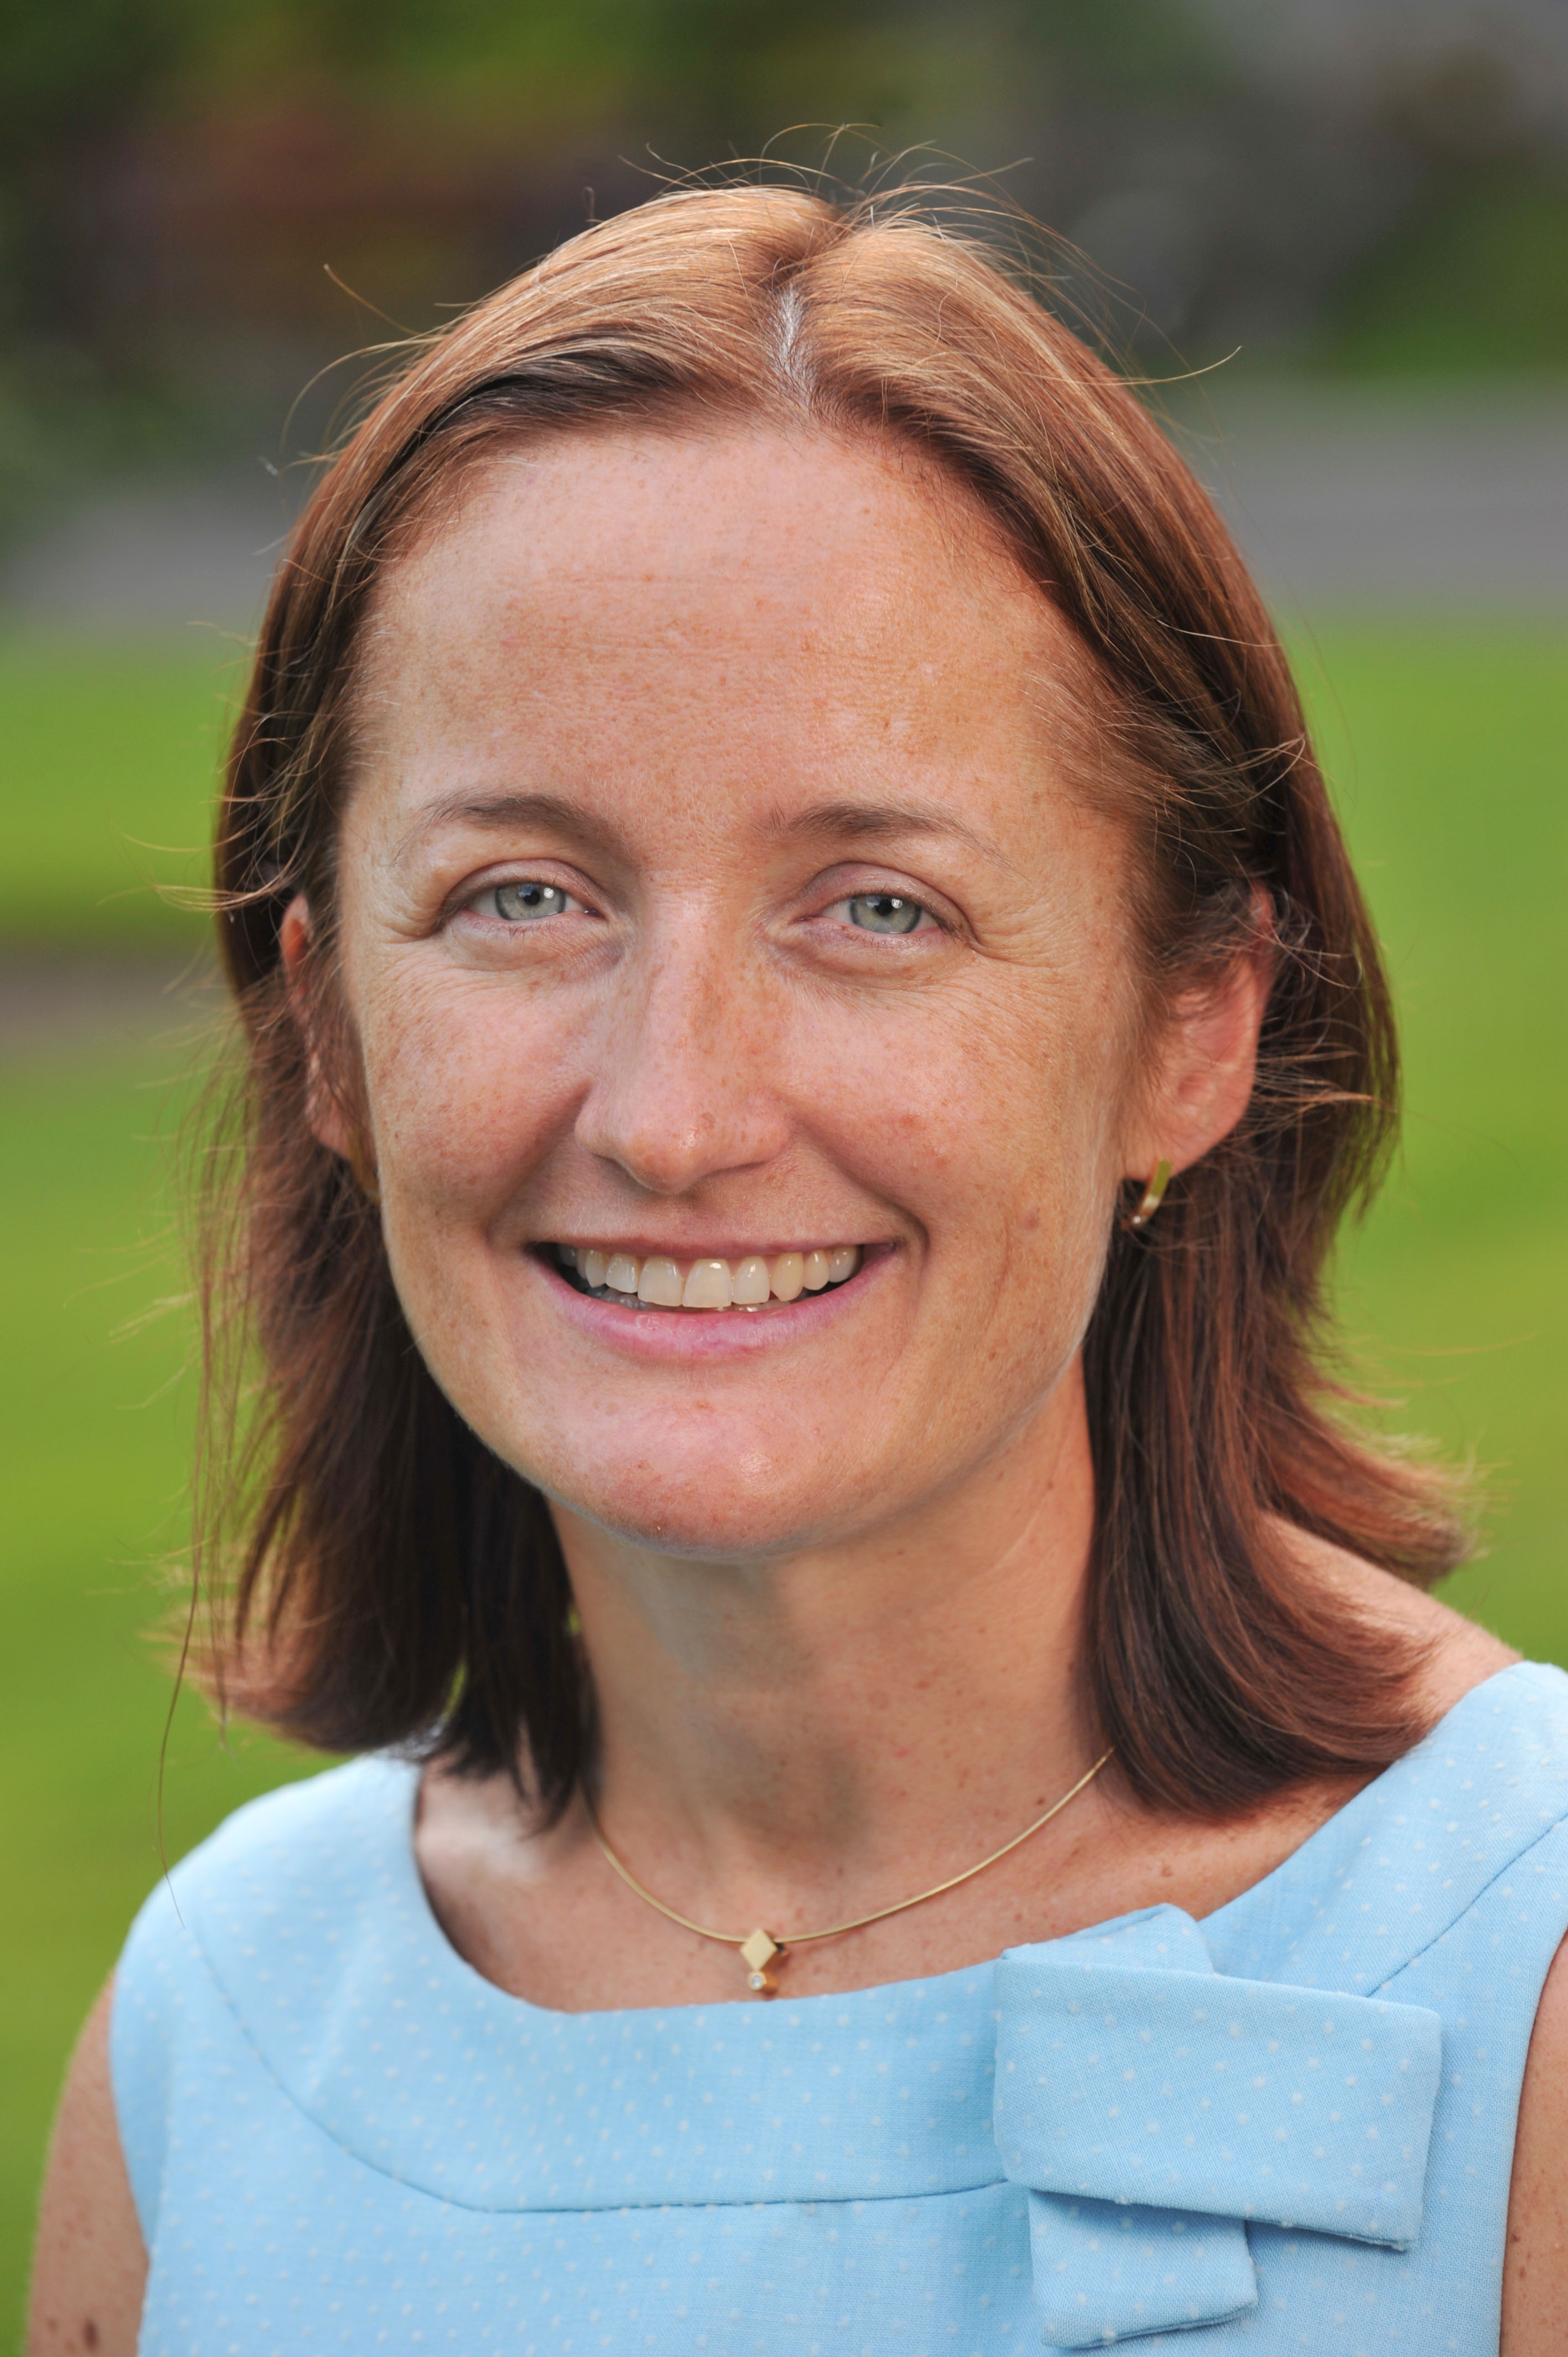 Professor Patricia Kearney, new Research Leader appointed by The Health Research Board (HRB)